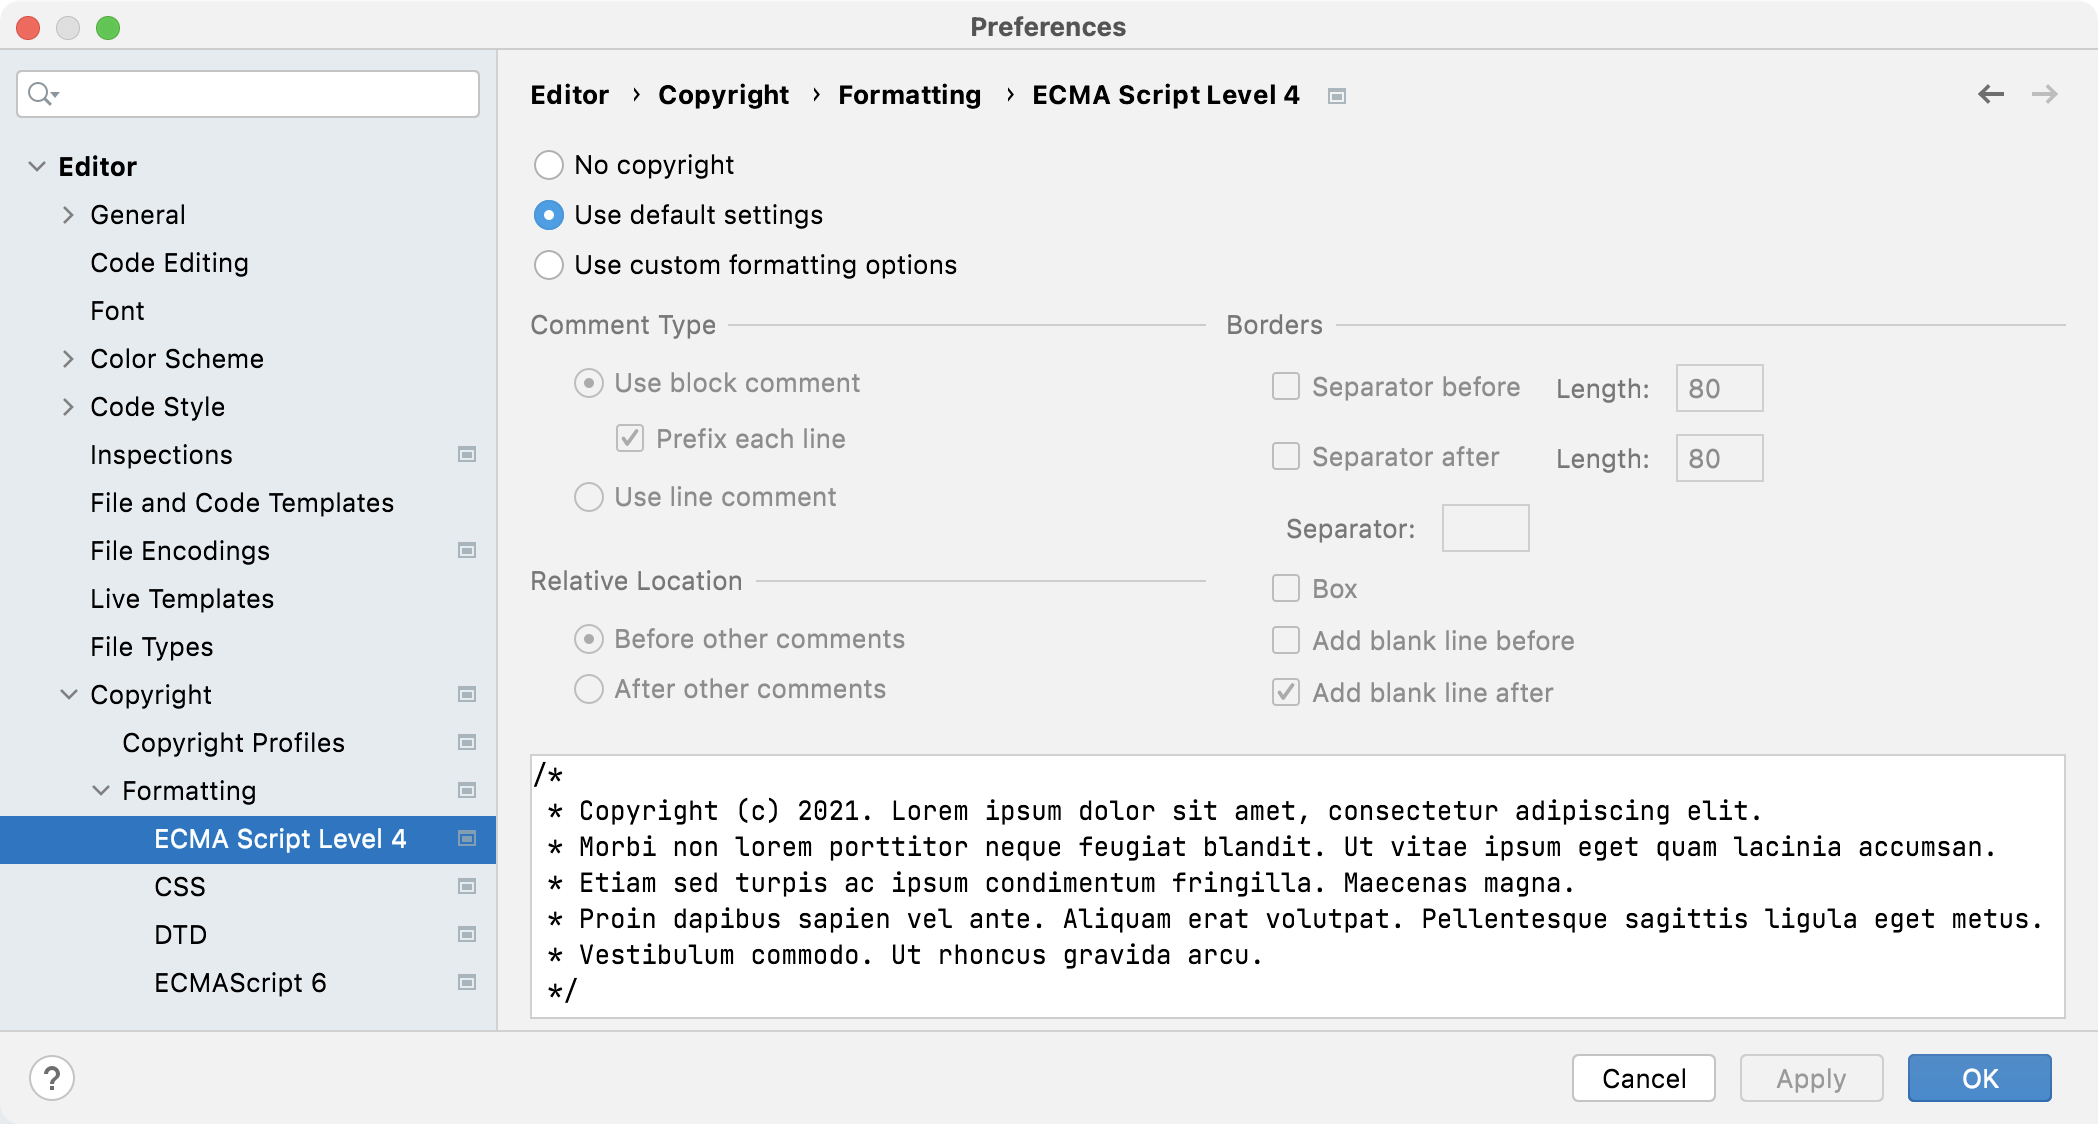 Changing the formatting for a copyright notice